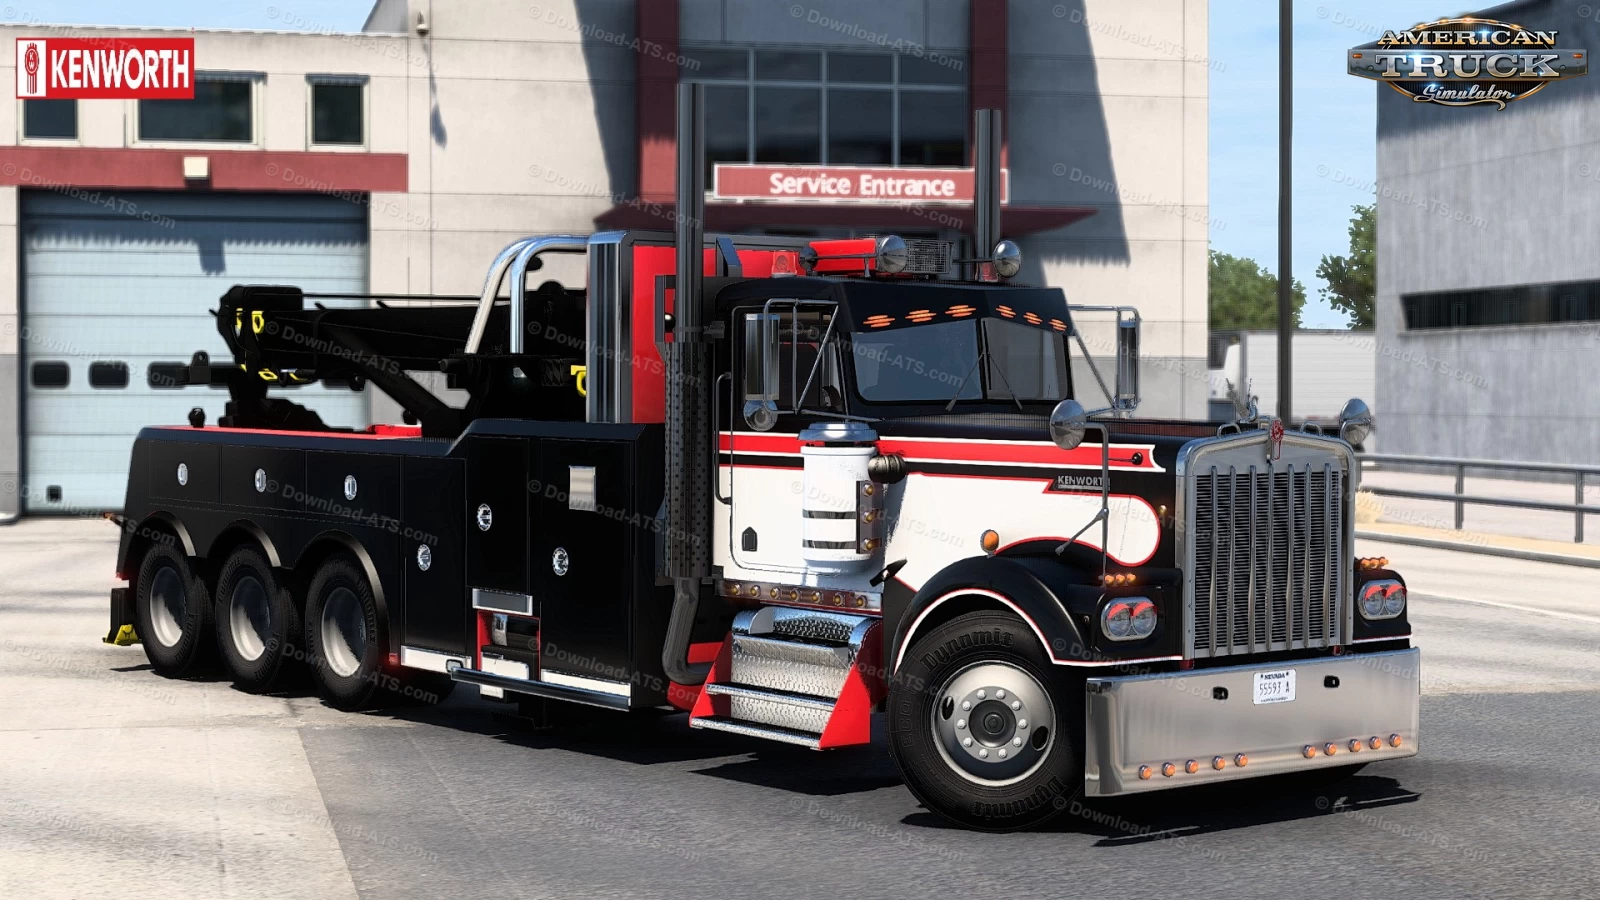 Kenworth W900A Custom Truck v1.4 by Renenate (1.44.x) for ATS